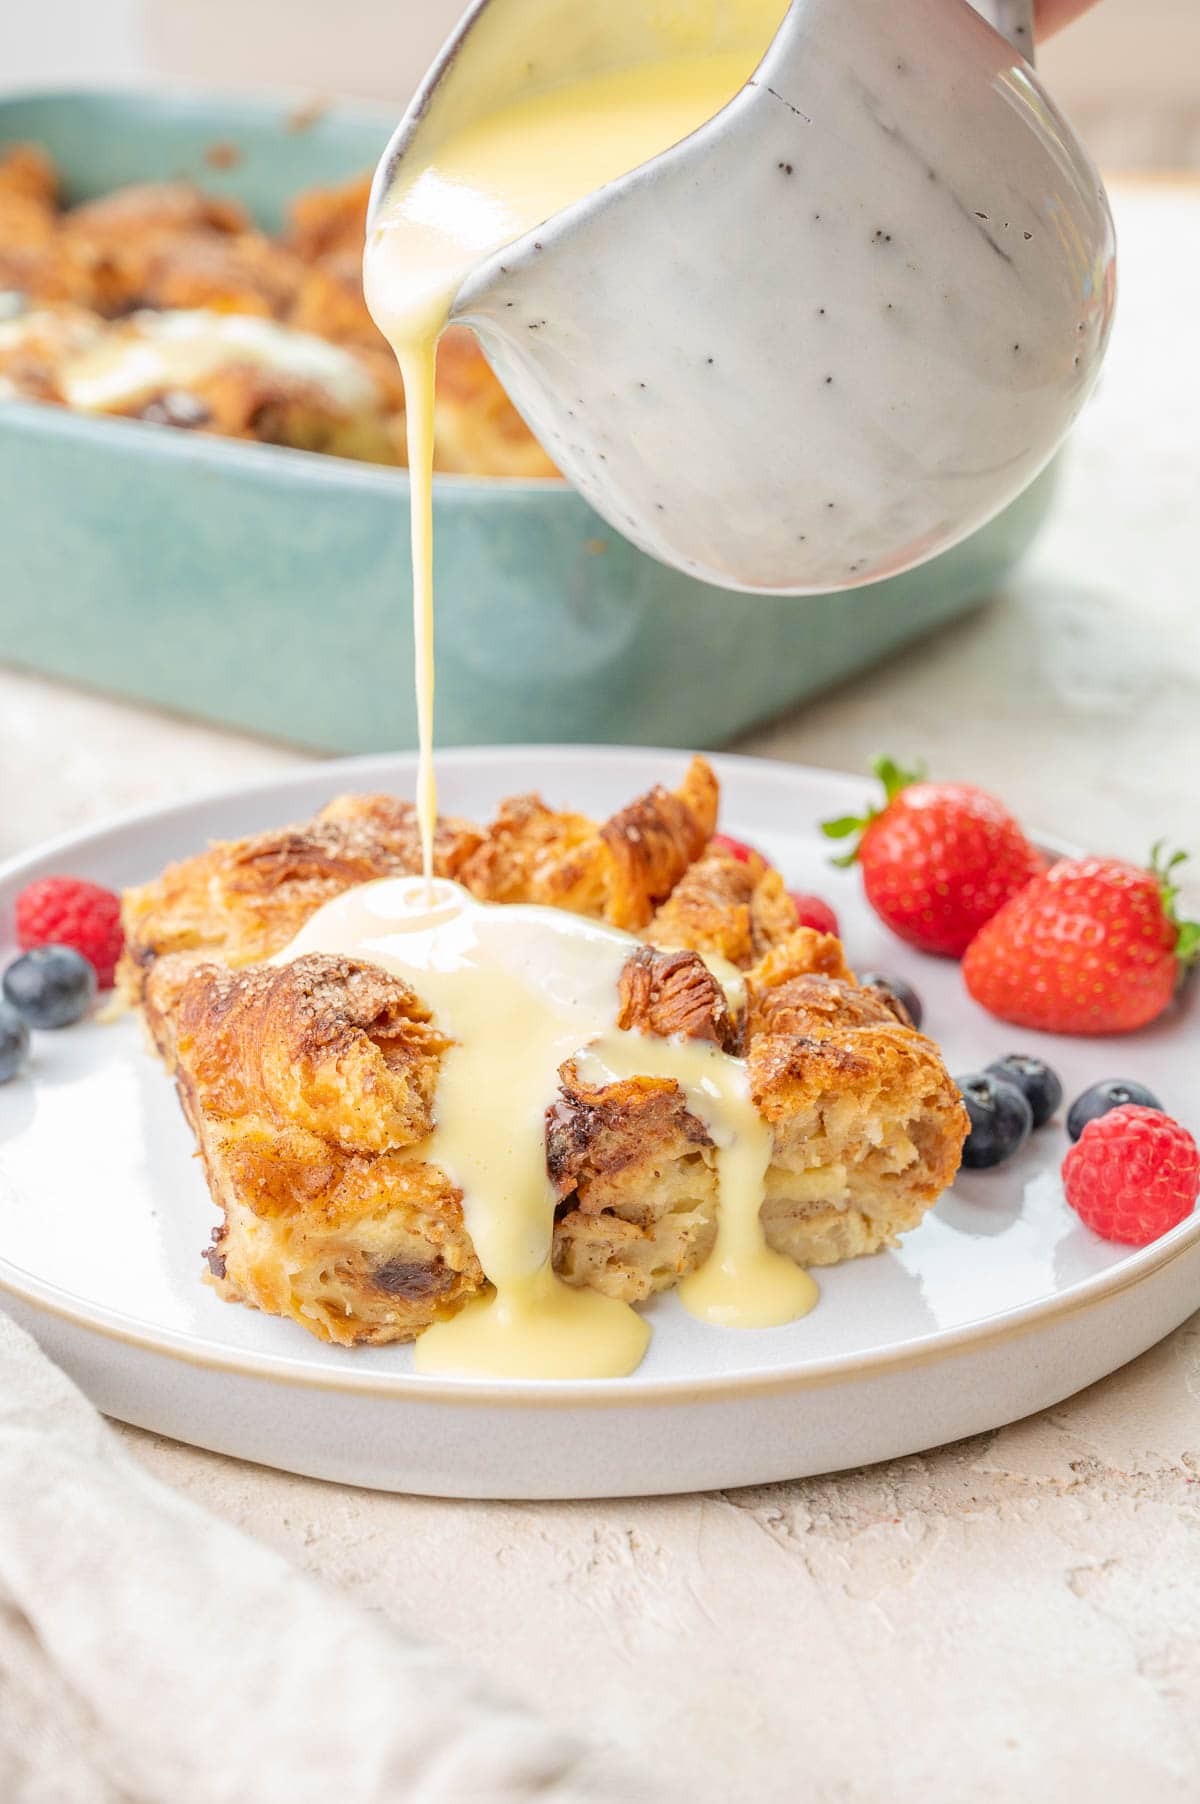 Vanilla sauce is being poured over a piece of croissant bread pudding on a white plate.